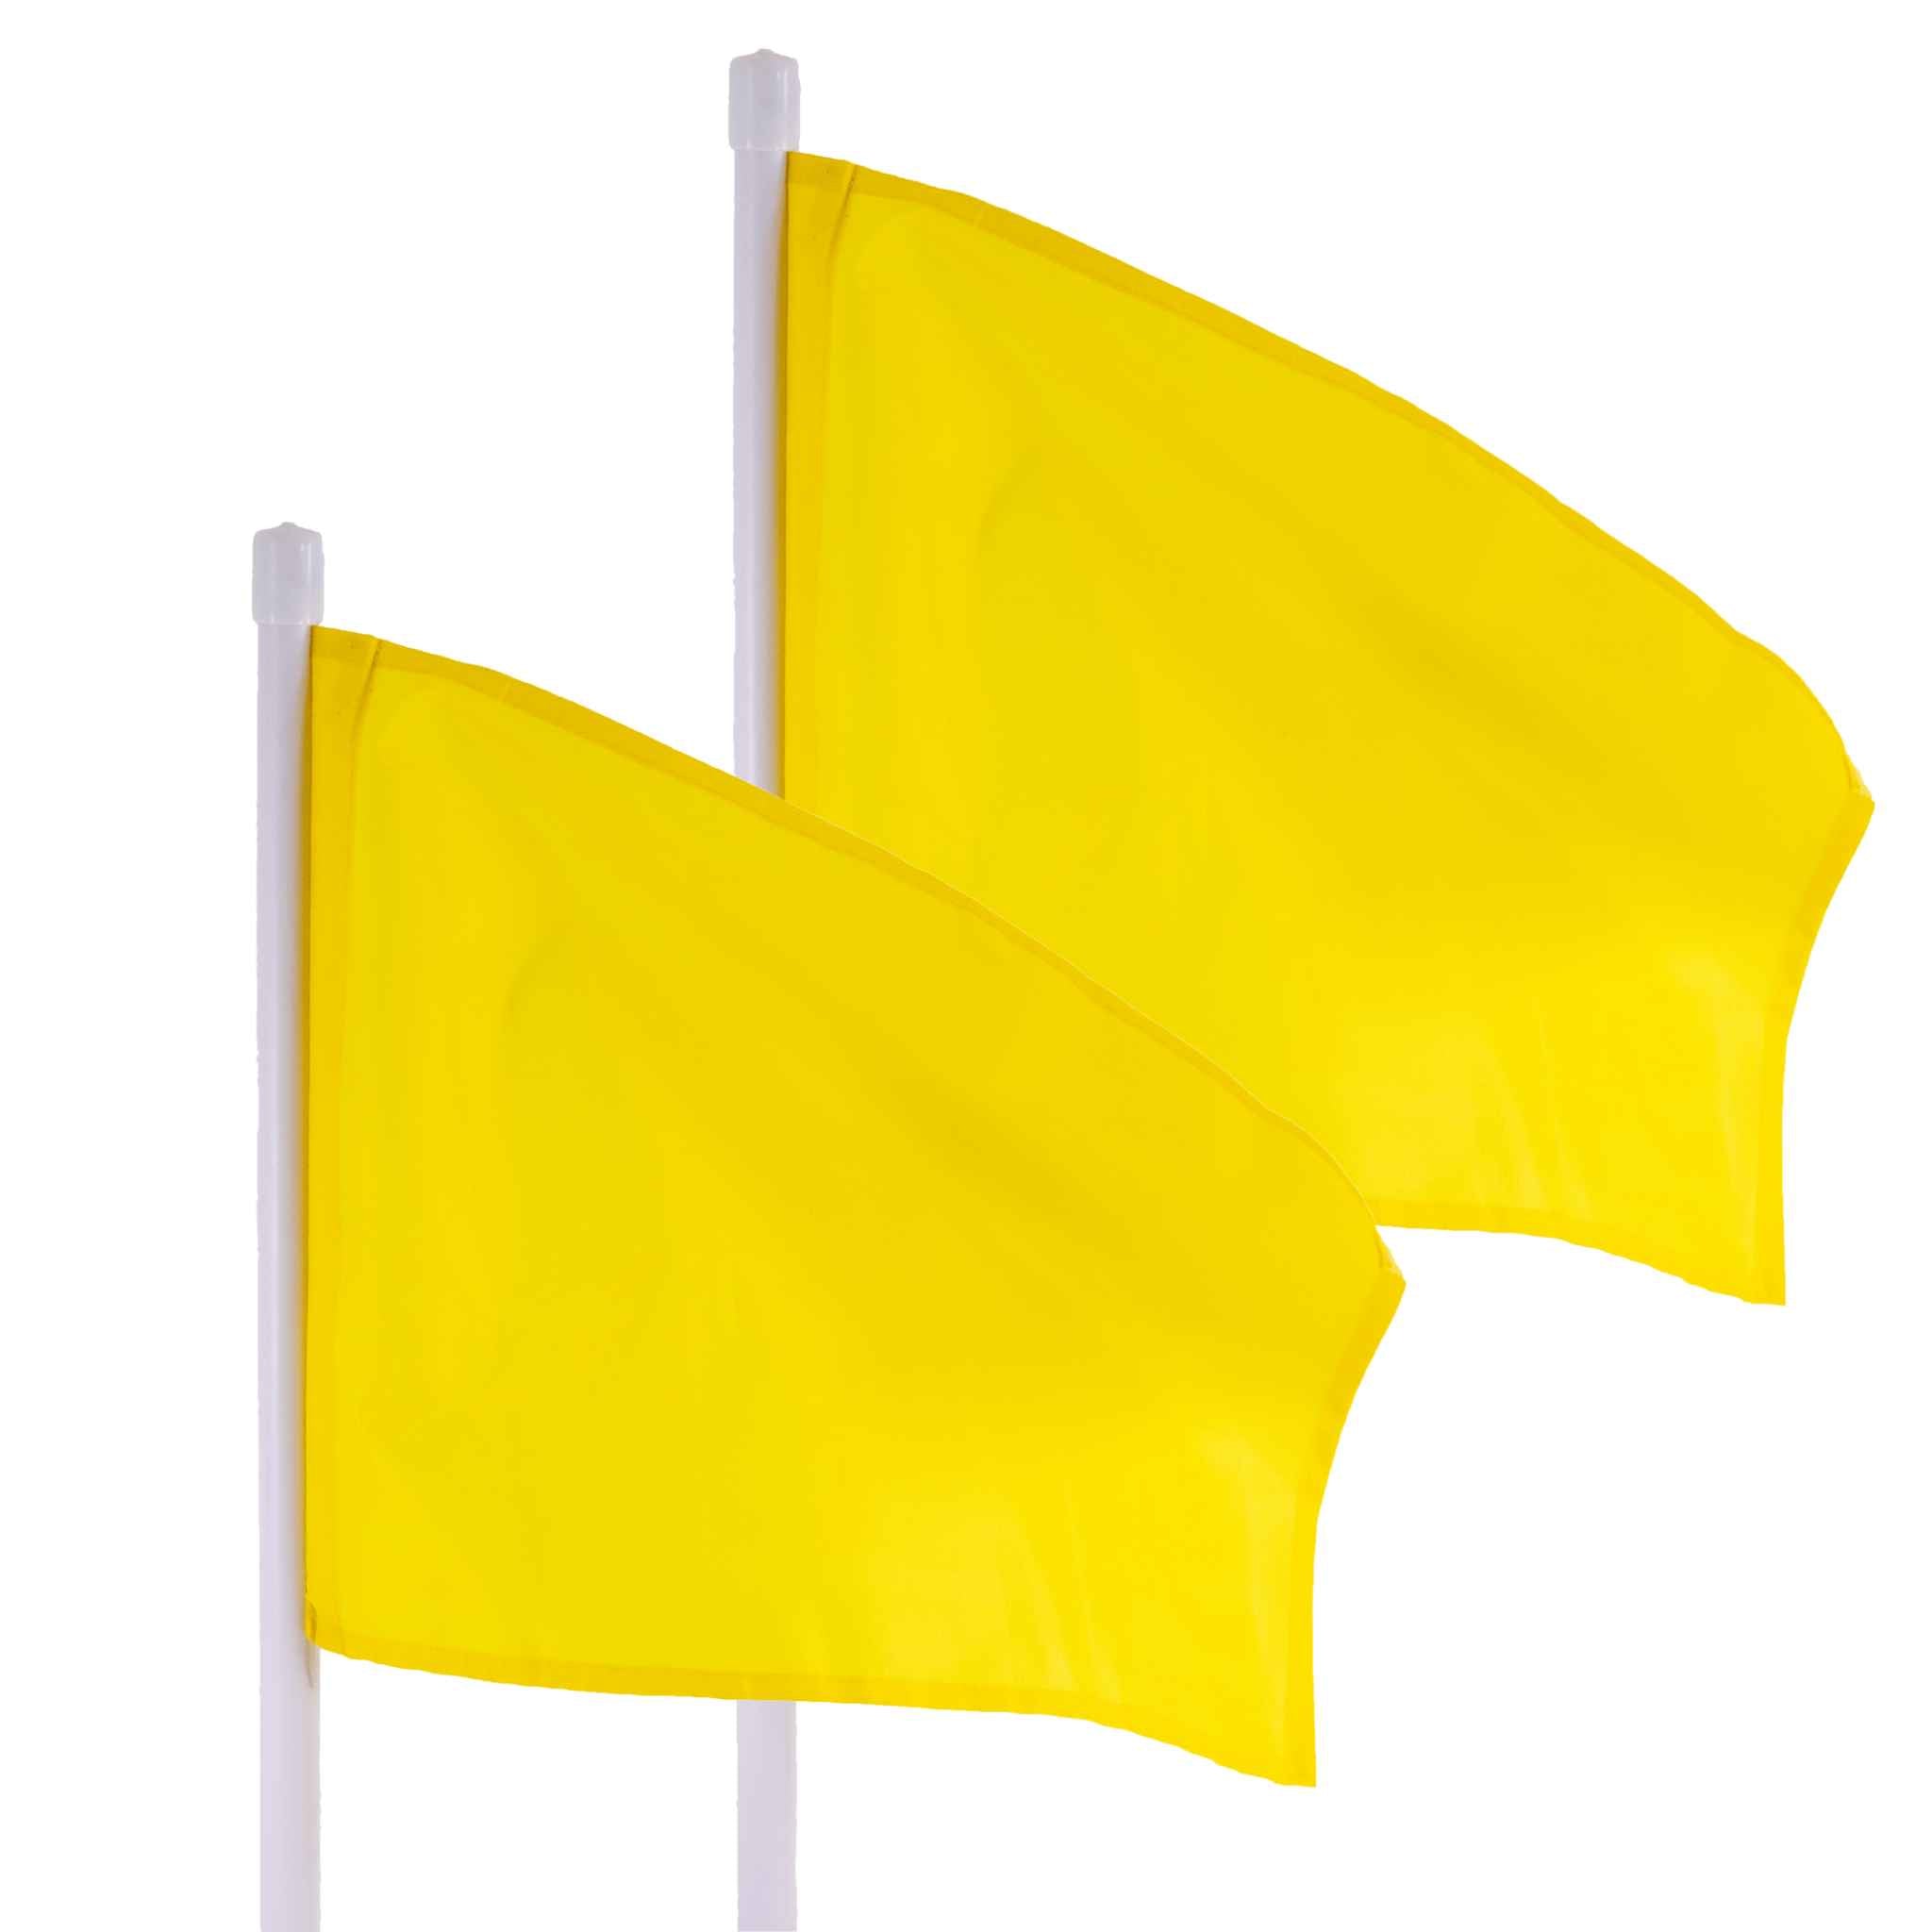 Fabric Flags for Athletics Officials and Sports Use | Simple solid handle | Pair of Yellow